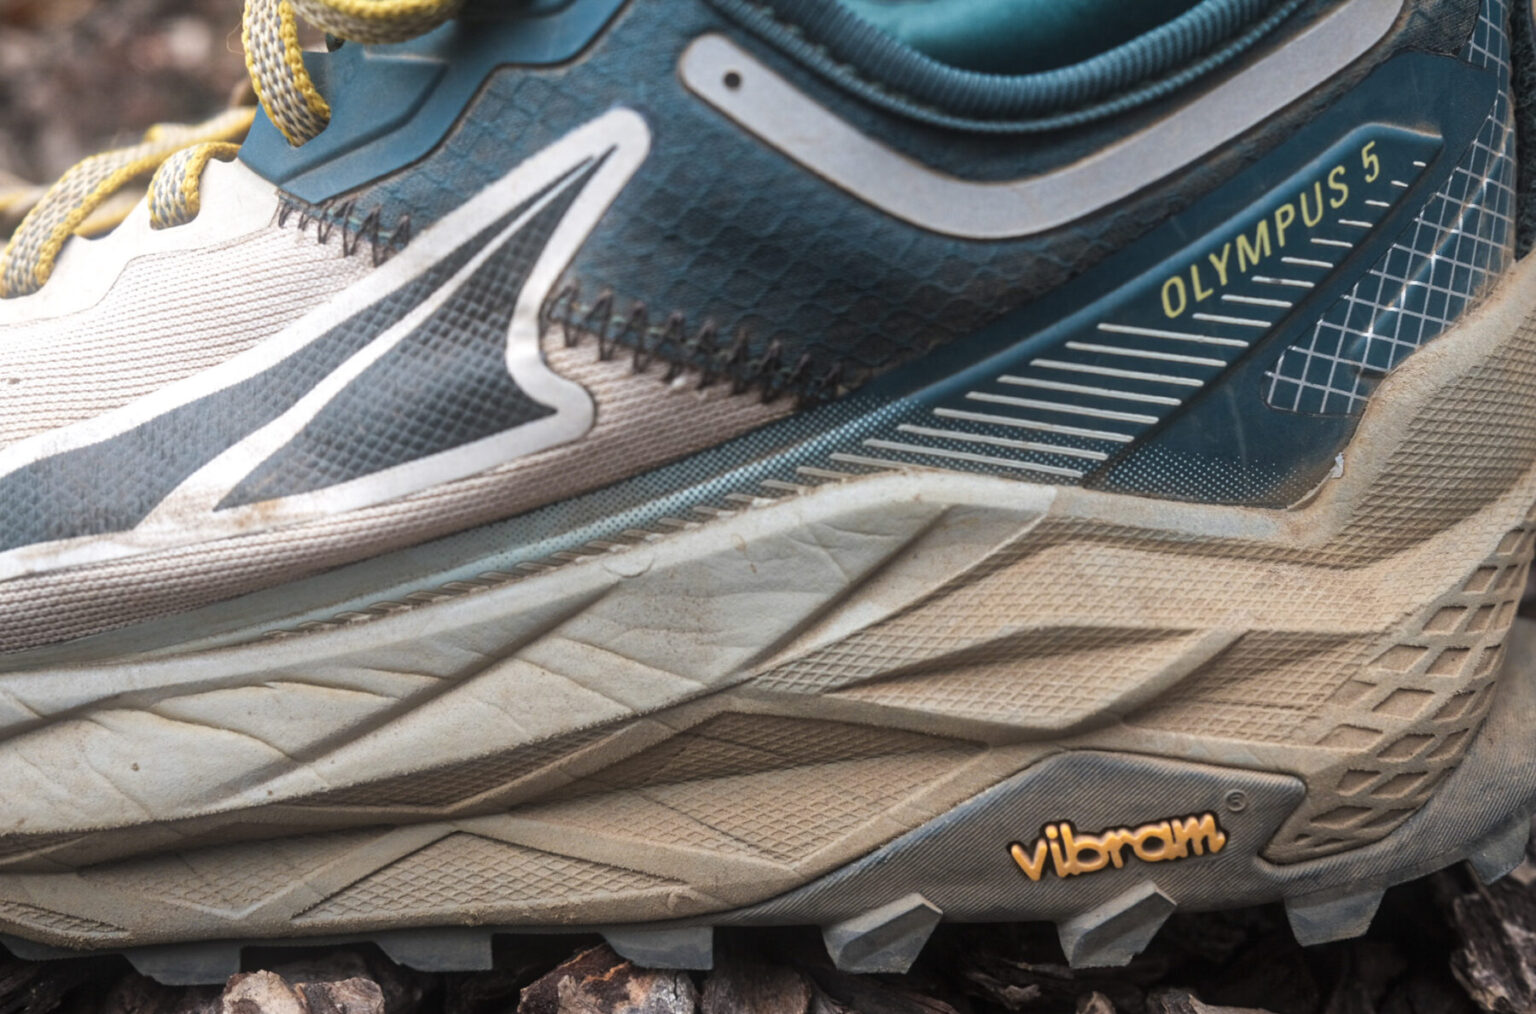 Altra Olympus 5 | Blister Review